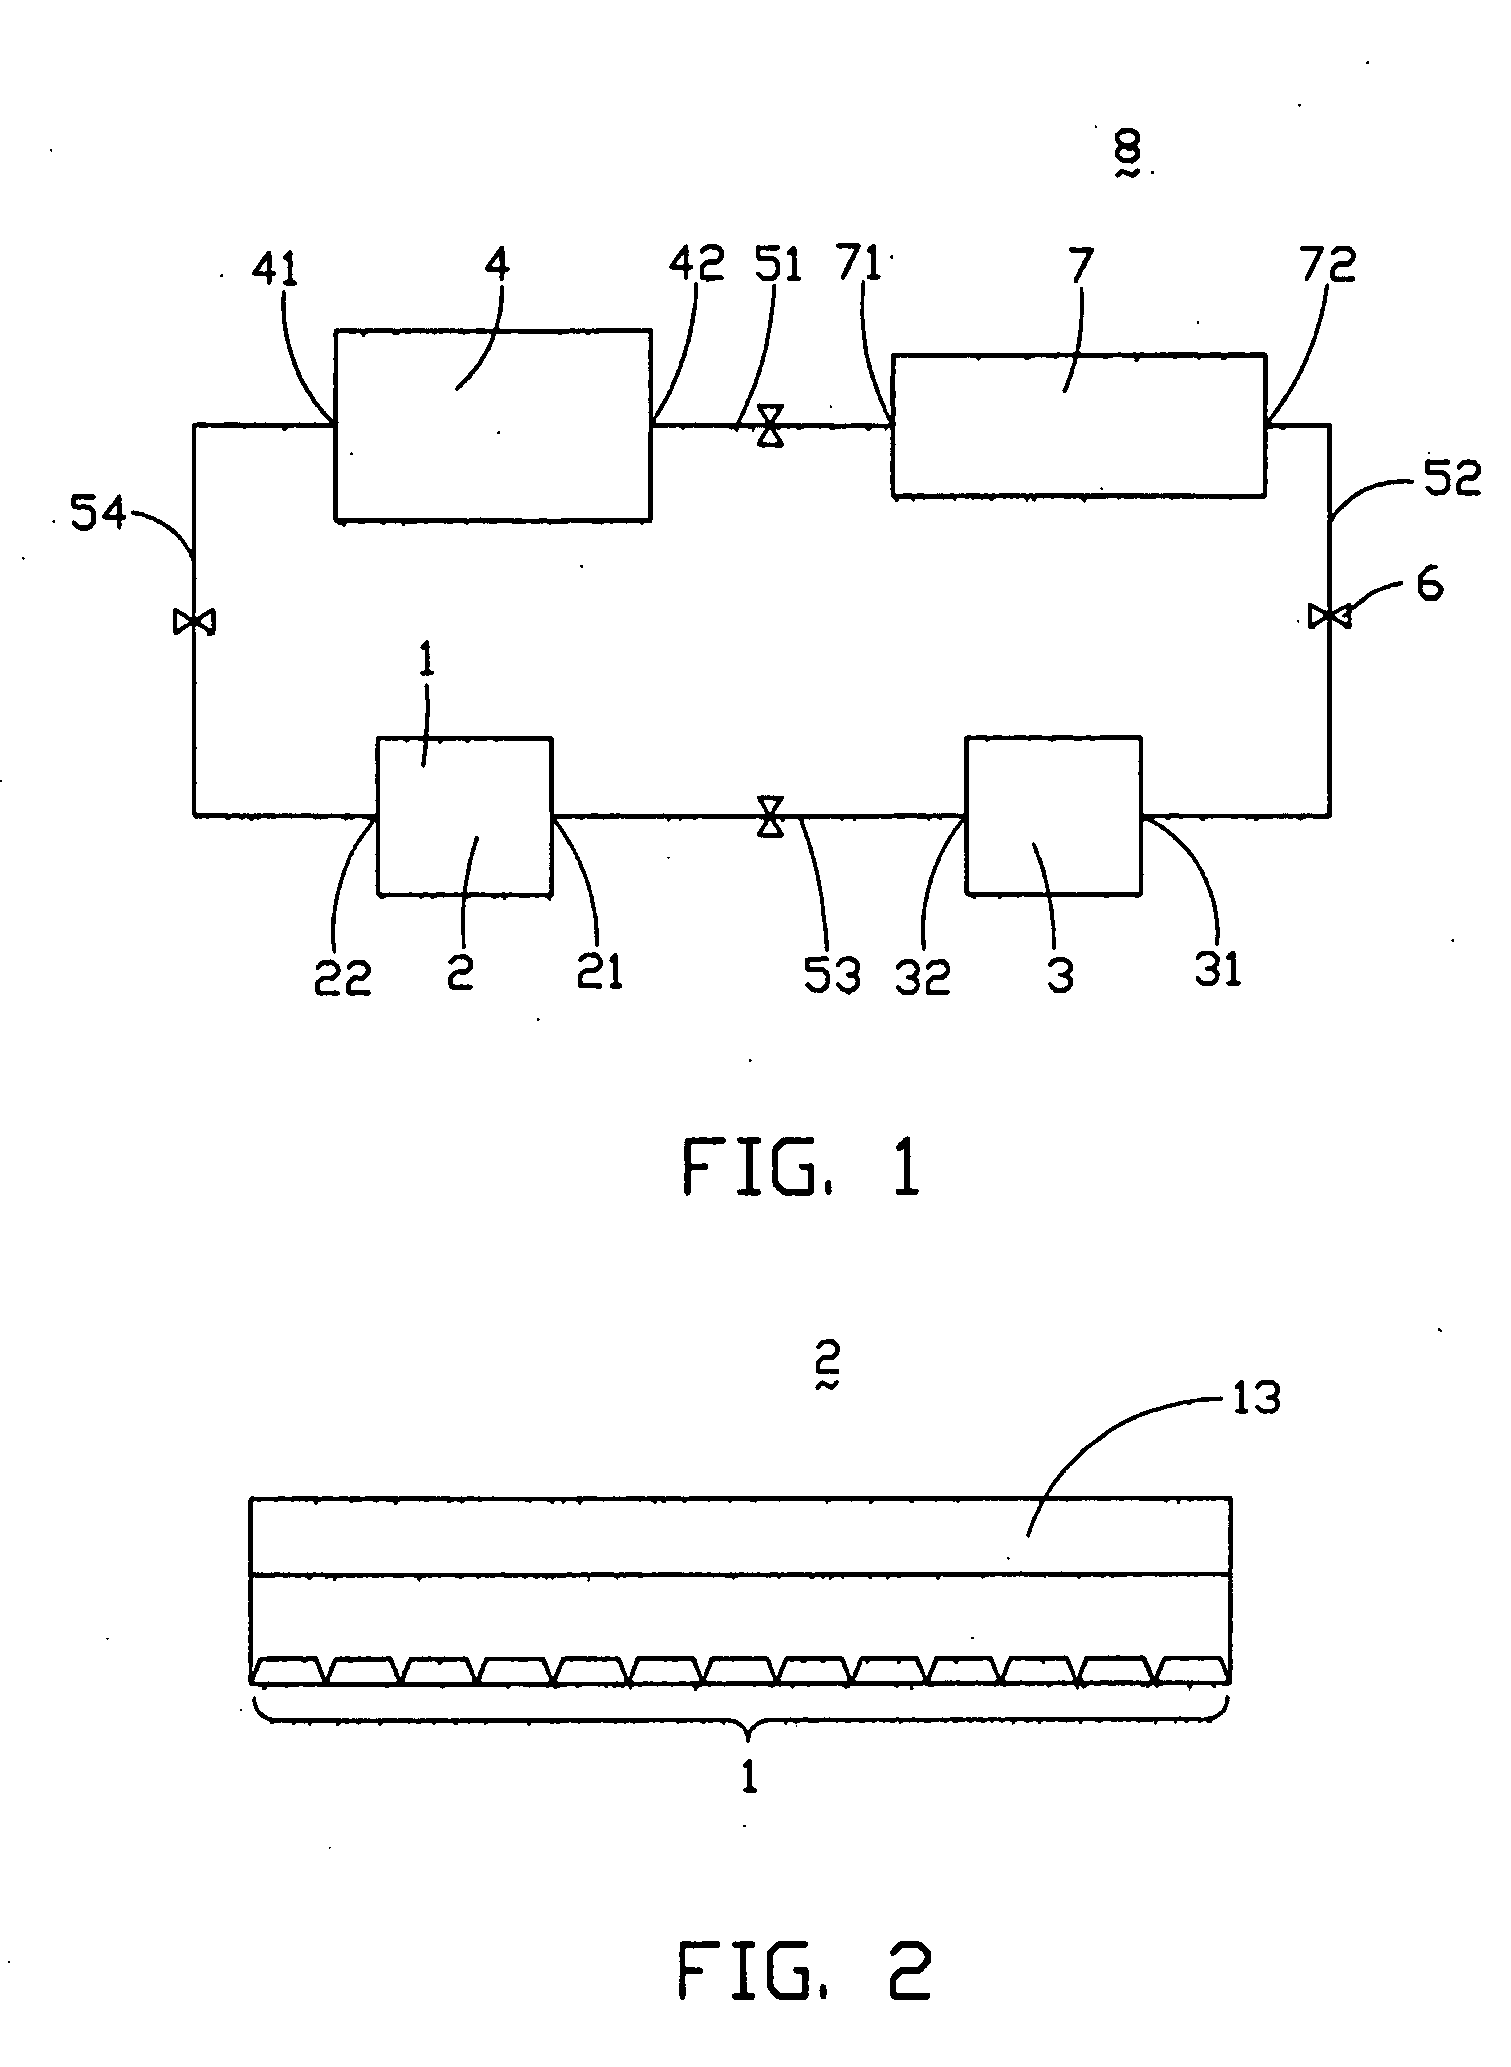 Heat dissipating circulatory system with sputtering assembly